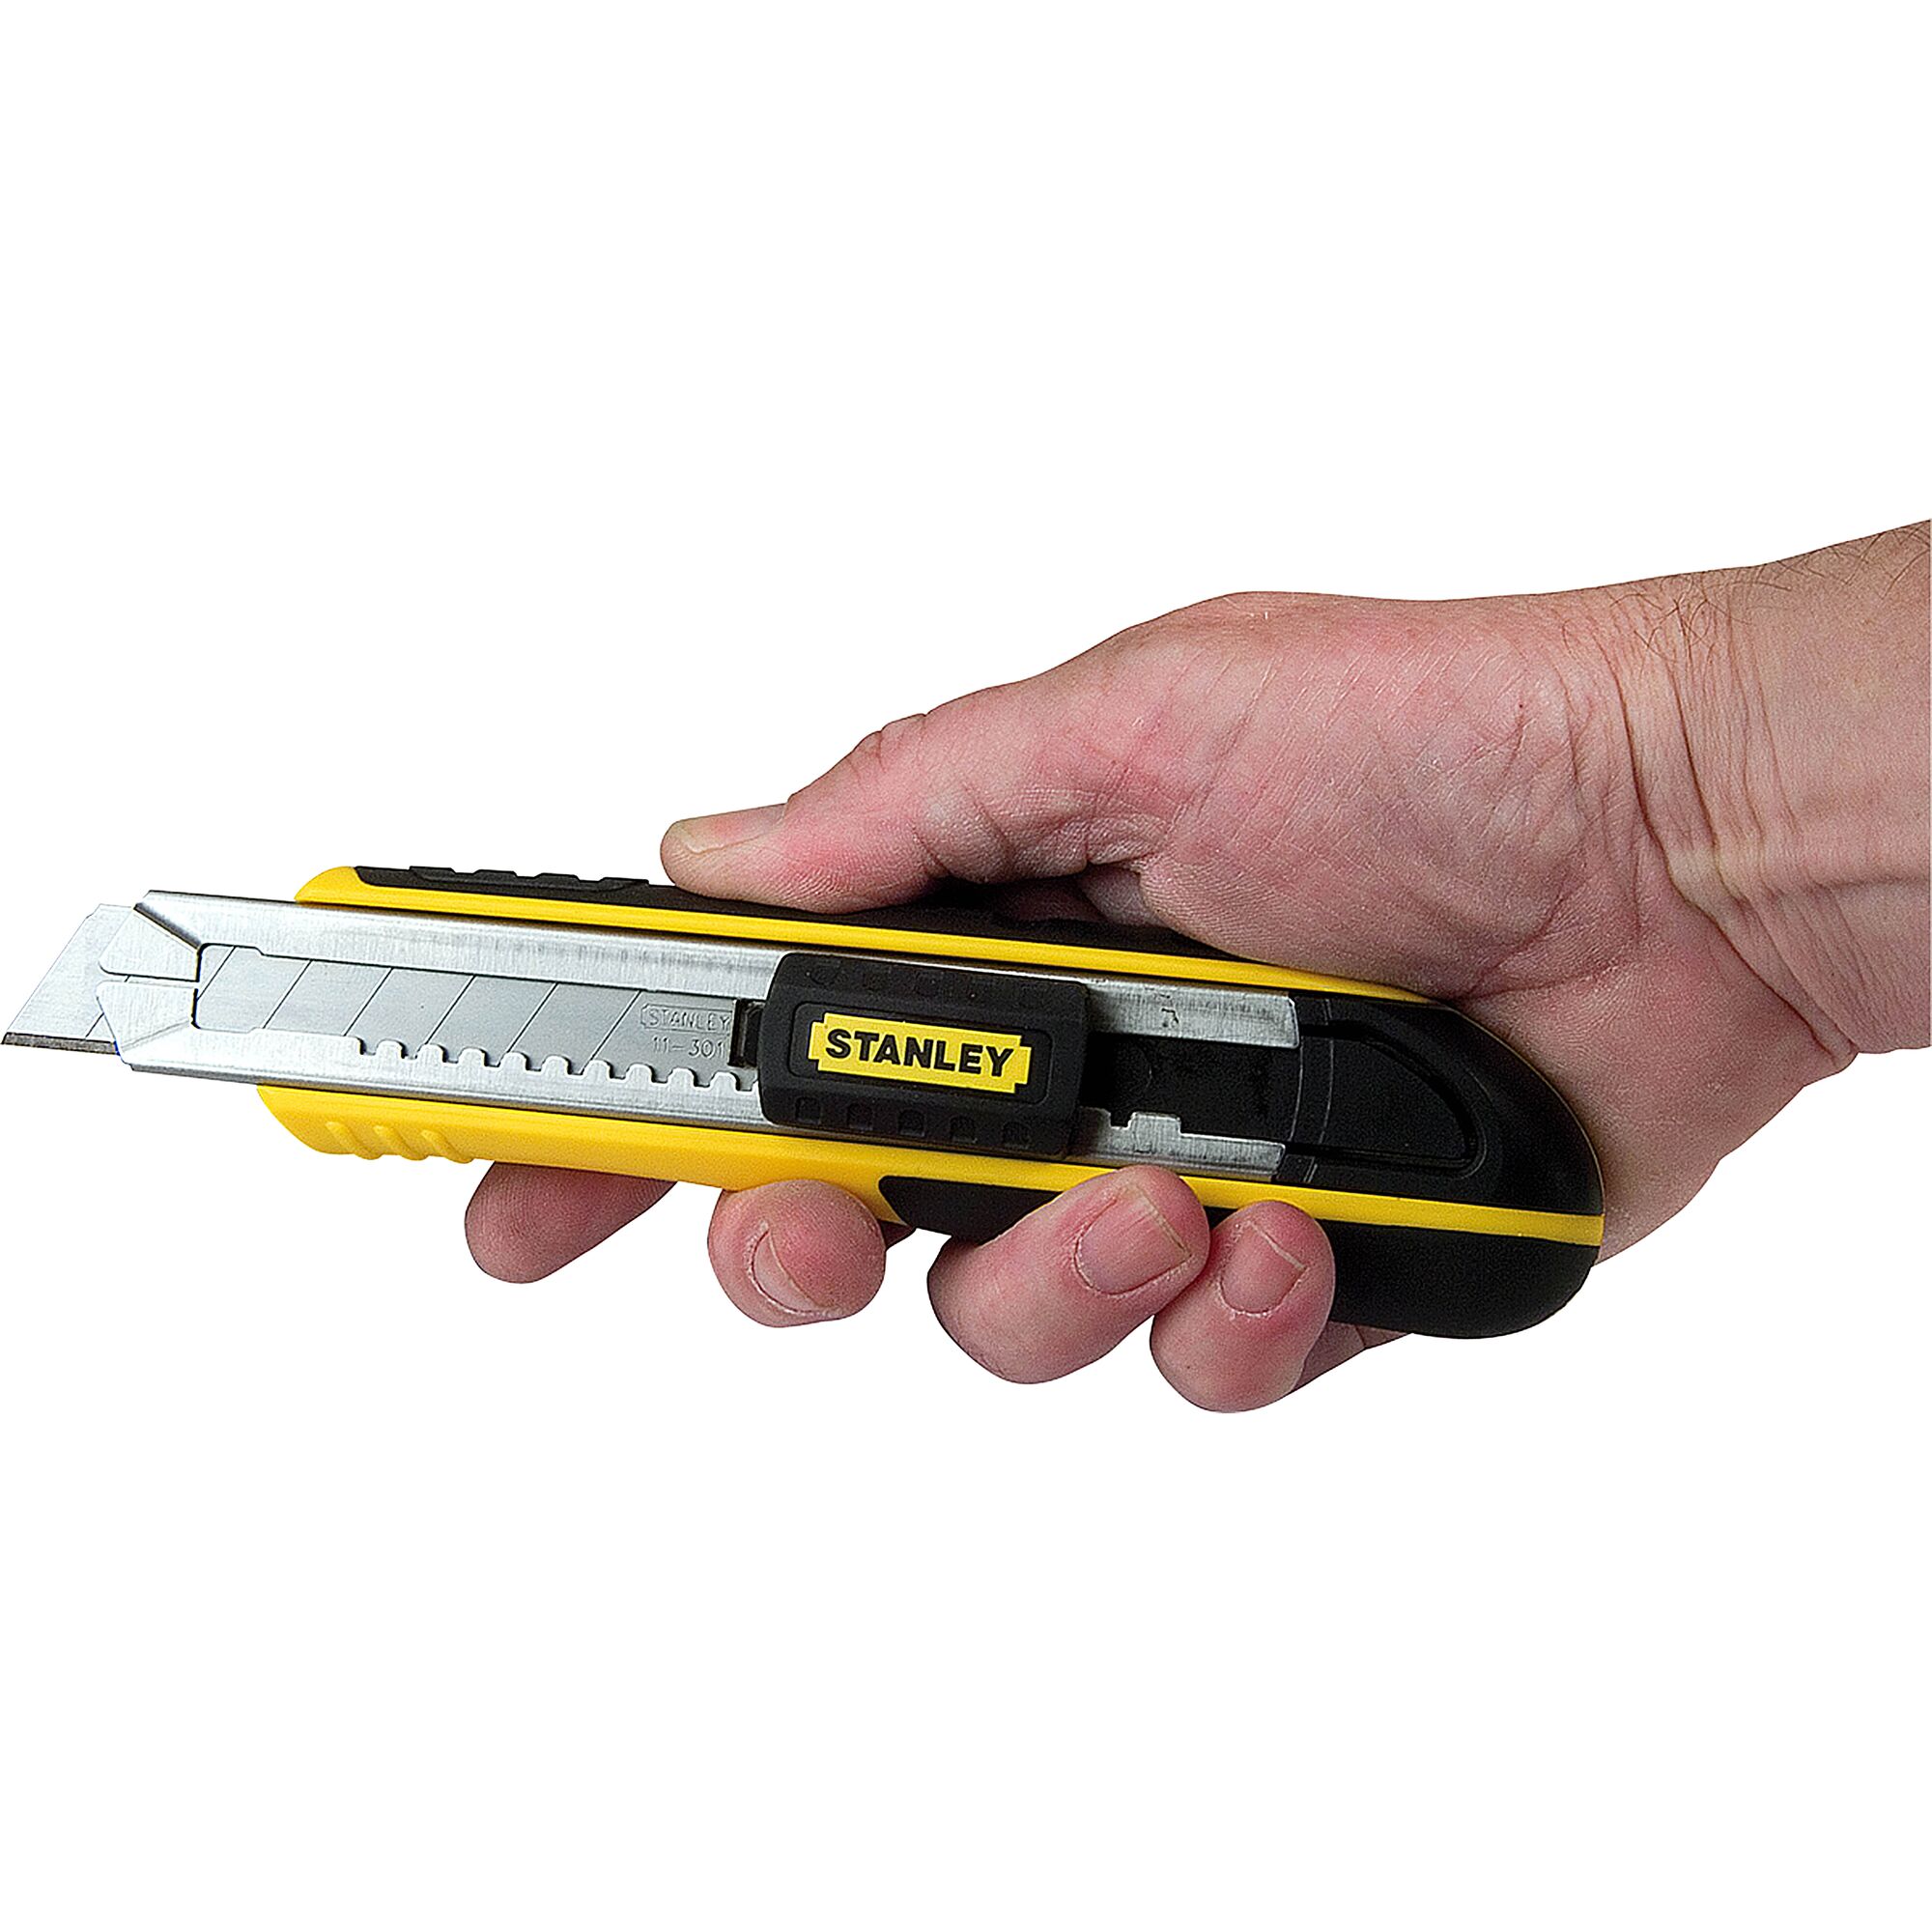 18mm,Silver/Yellow/Black Stanley 10-481 FatMax Snap-Off Knife 